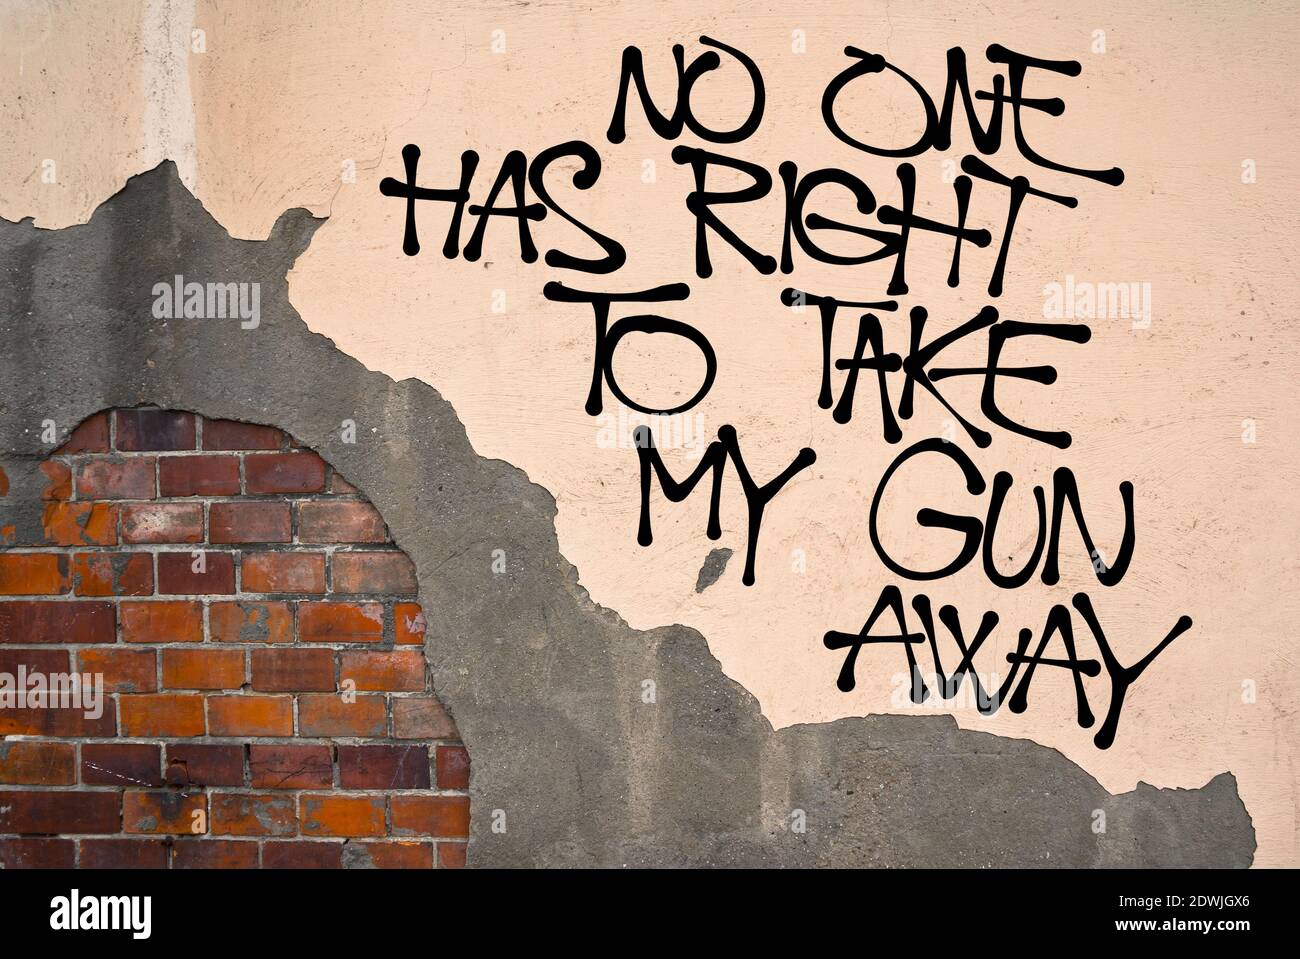 No One Has Right To Take My Gun Away Handwritten Graffiti Sprayed On The Wall Fight Against Gun Control And Legislative Restriction Appeal To Pre Stock Photo Alamy